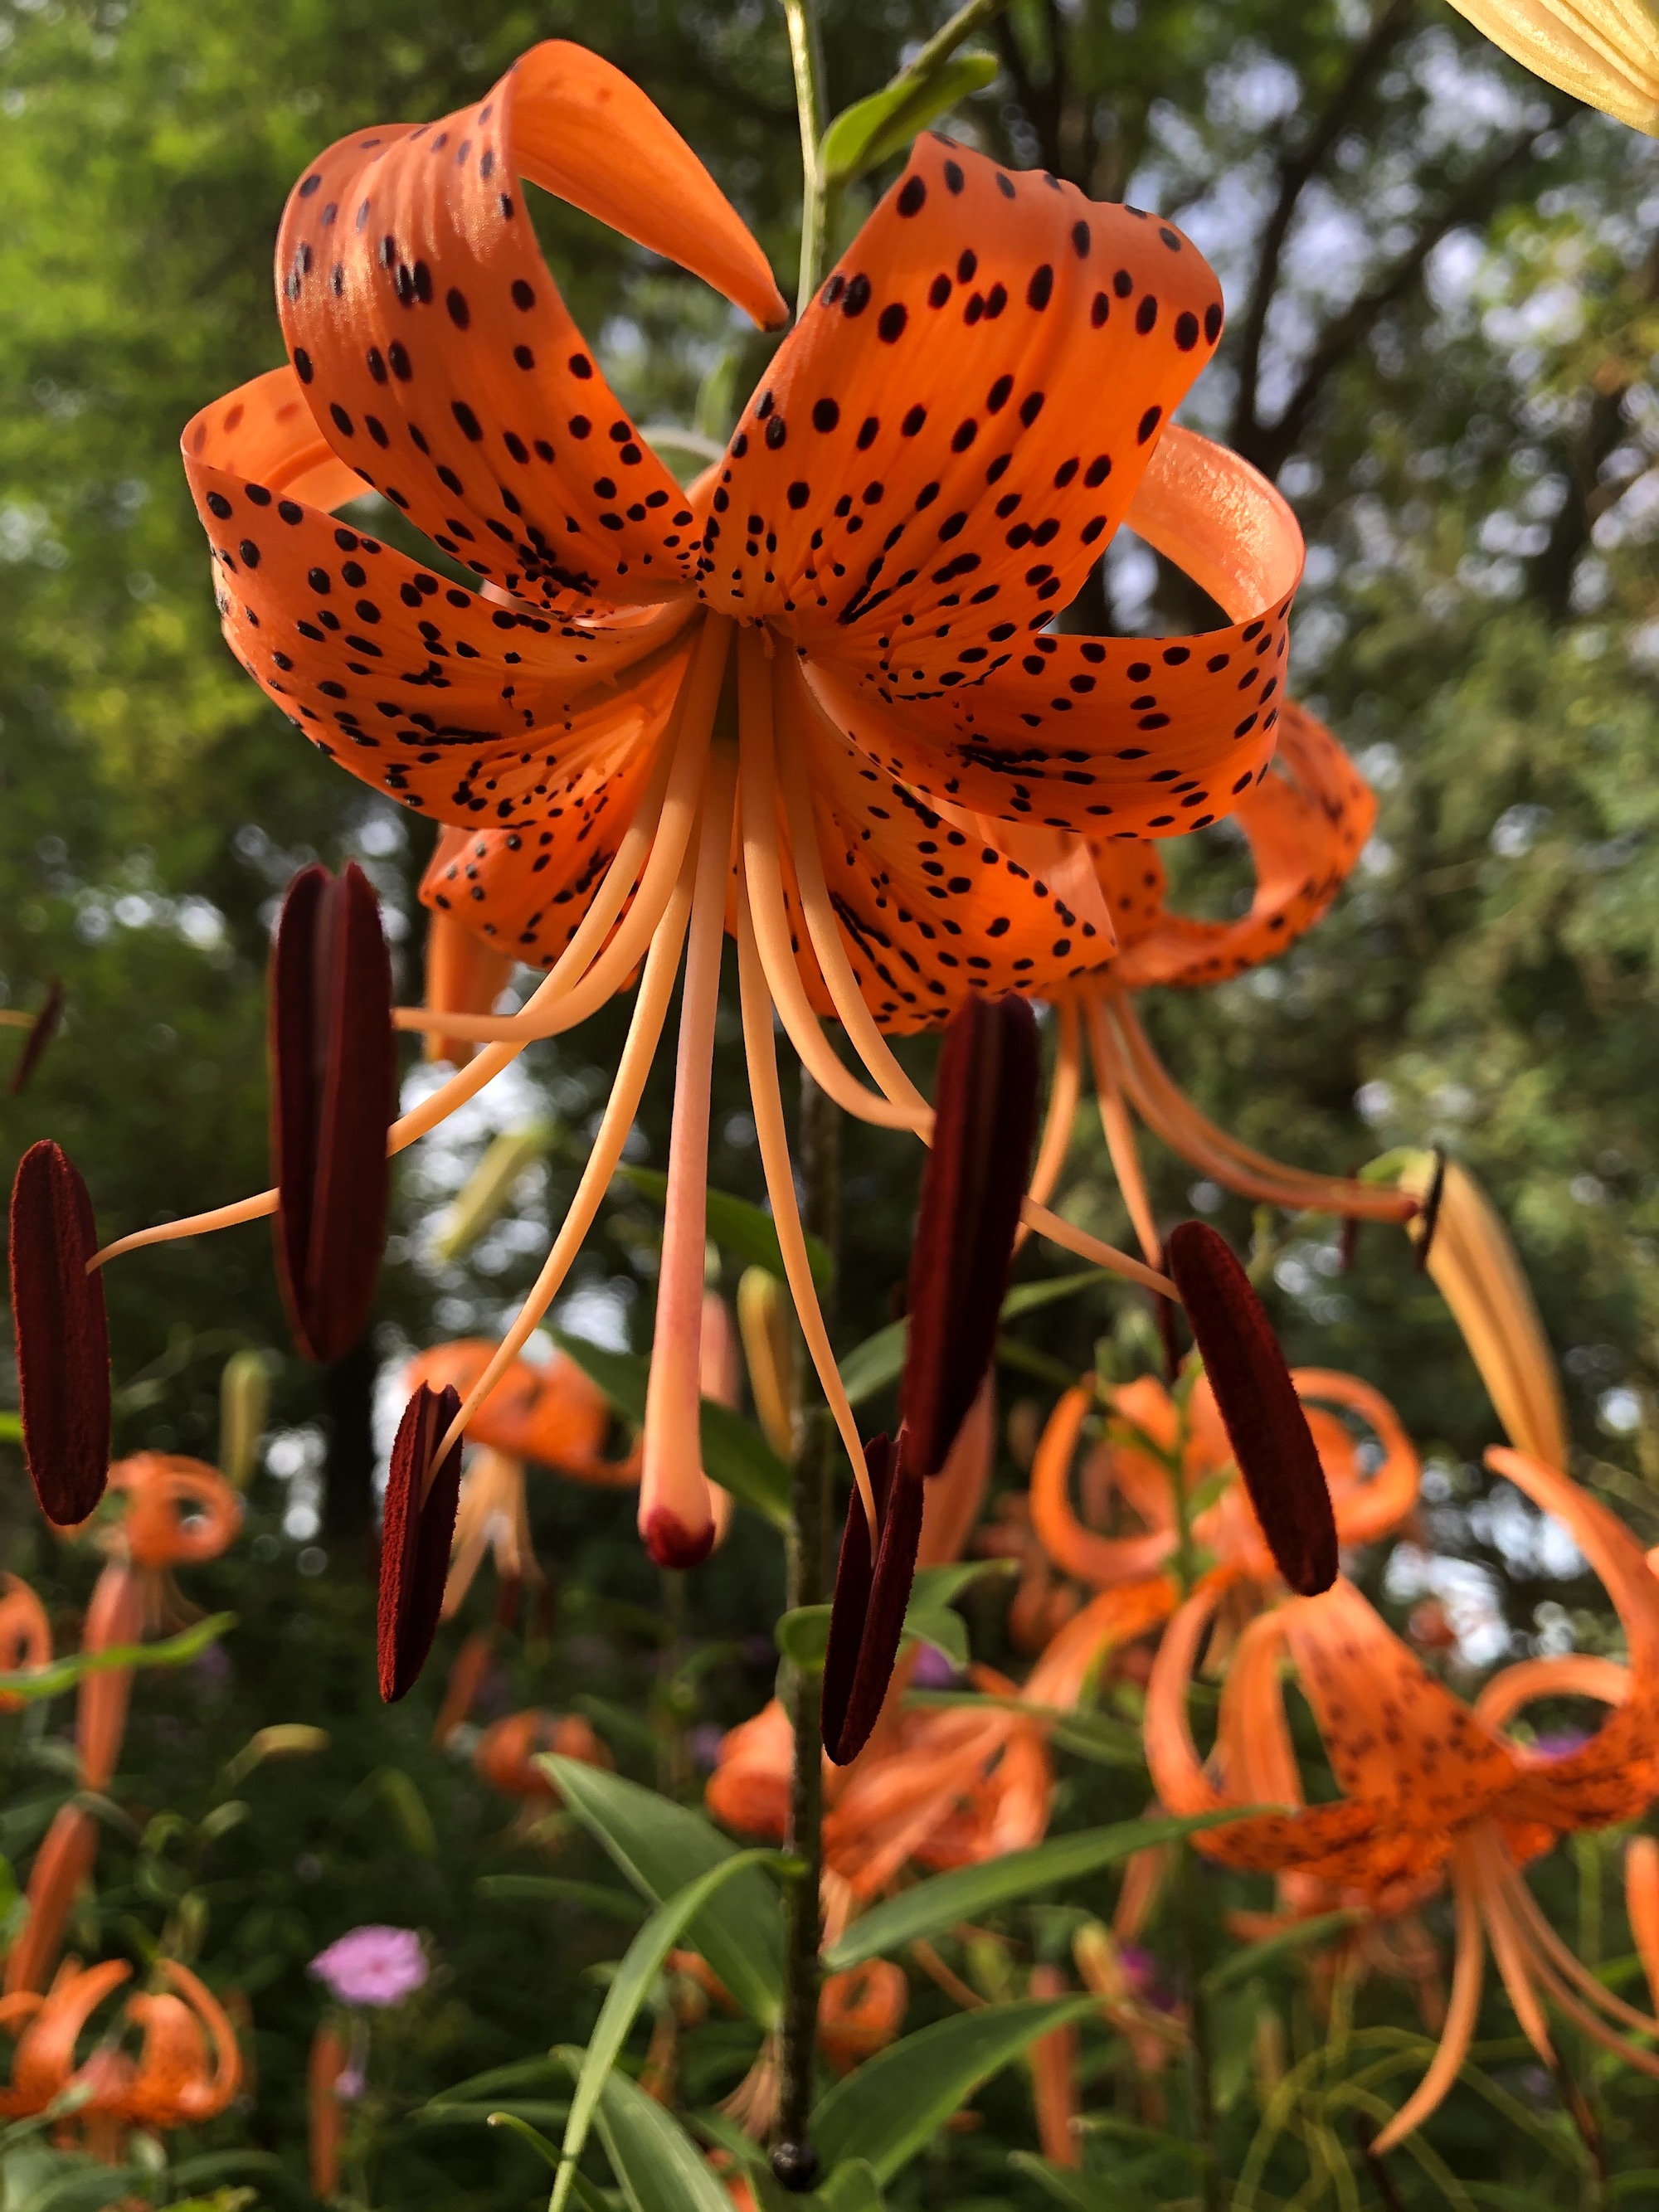 Tiger Lily near the Duck Pond on July 25, 2020.